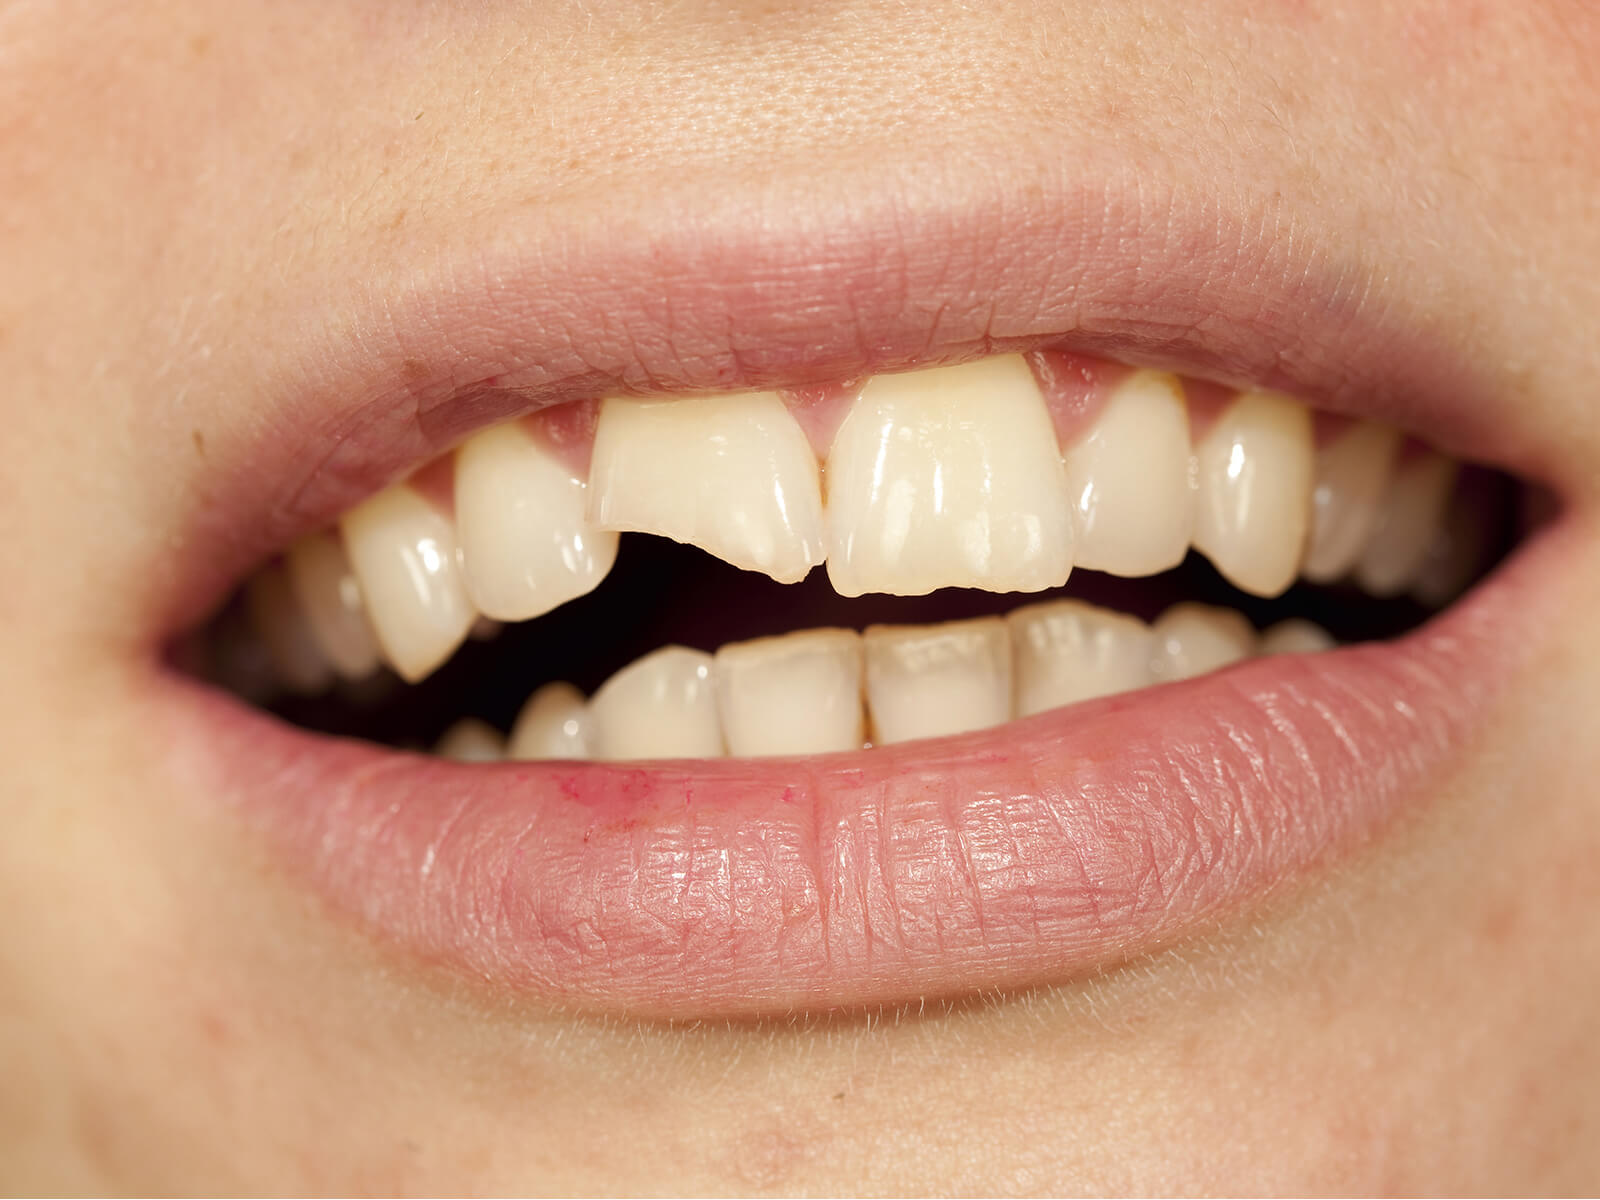 5 Ways To Protect Your Oral Health If You Break or Chip A Tooth